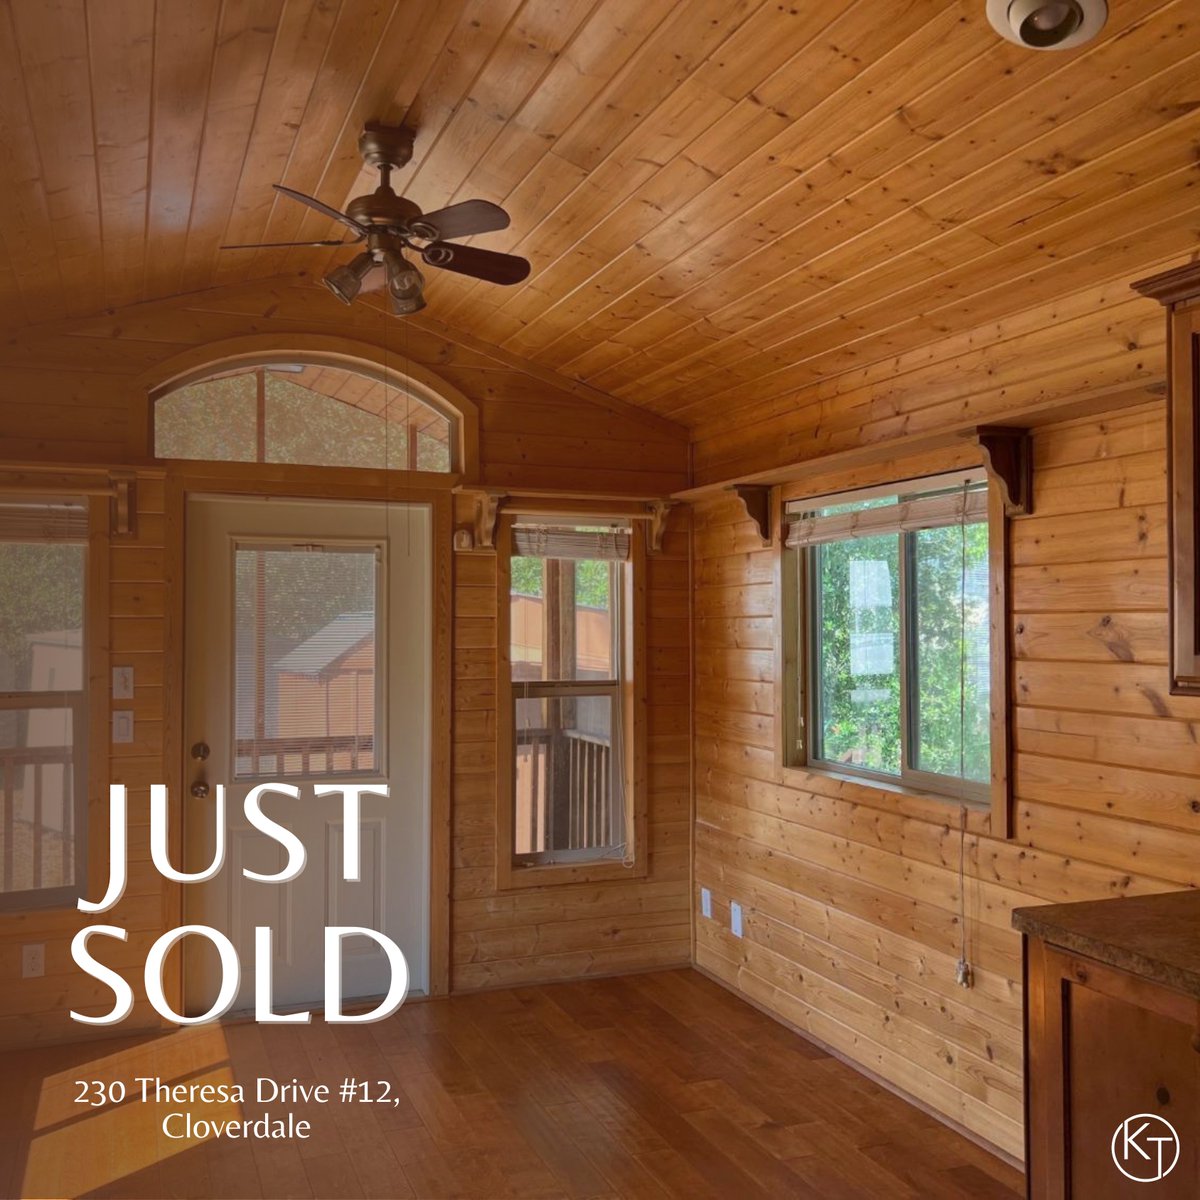 #homeownership #realestate #realtor #homebuying #realestateagent #downsizing #cloverdale #sellbuy #happyclients #thankyou #coldwellbanker #justsold #sold #newhome #cabin